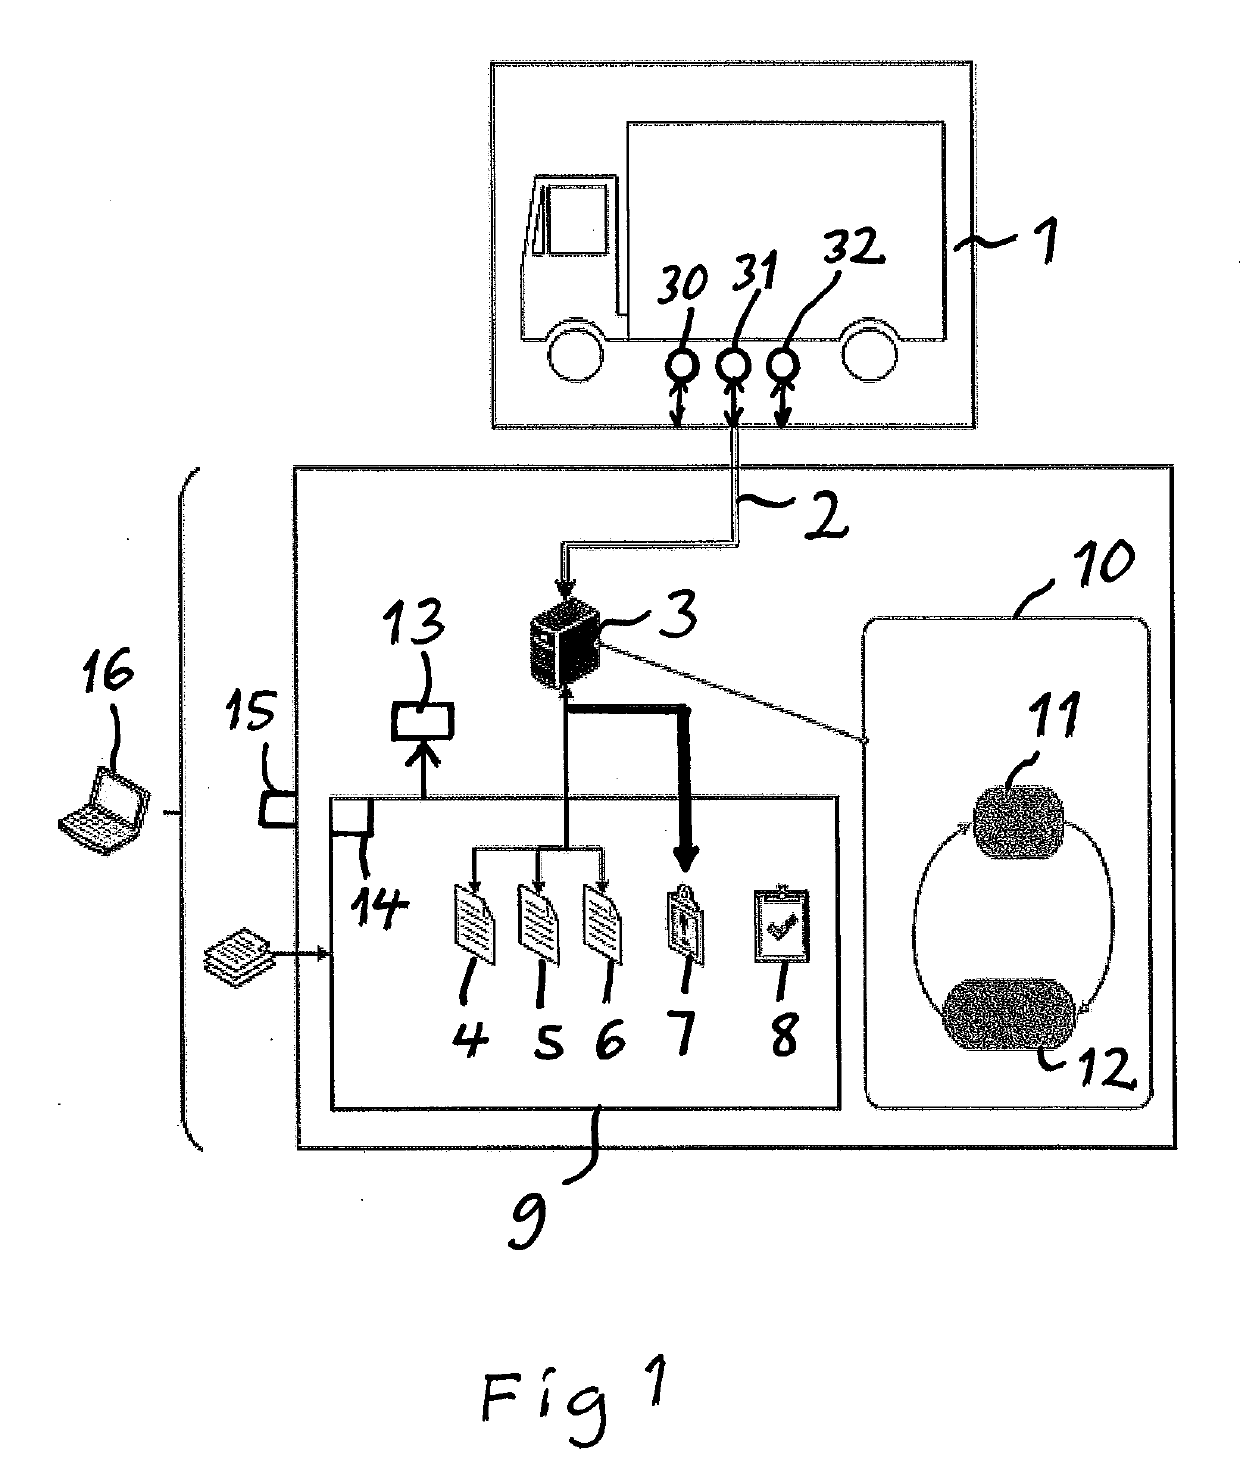 A system and a method for testing functionalities of a vehicle